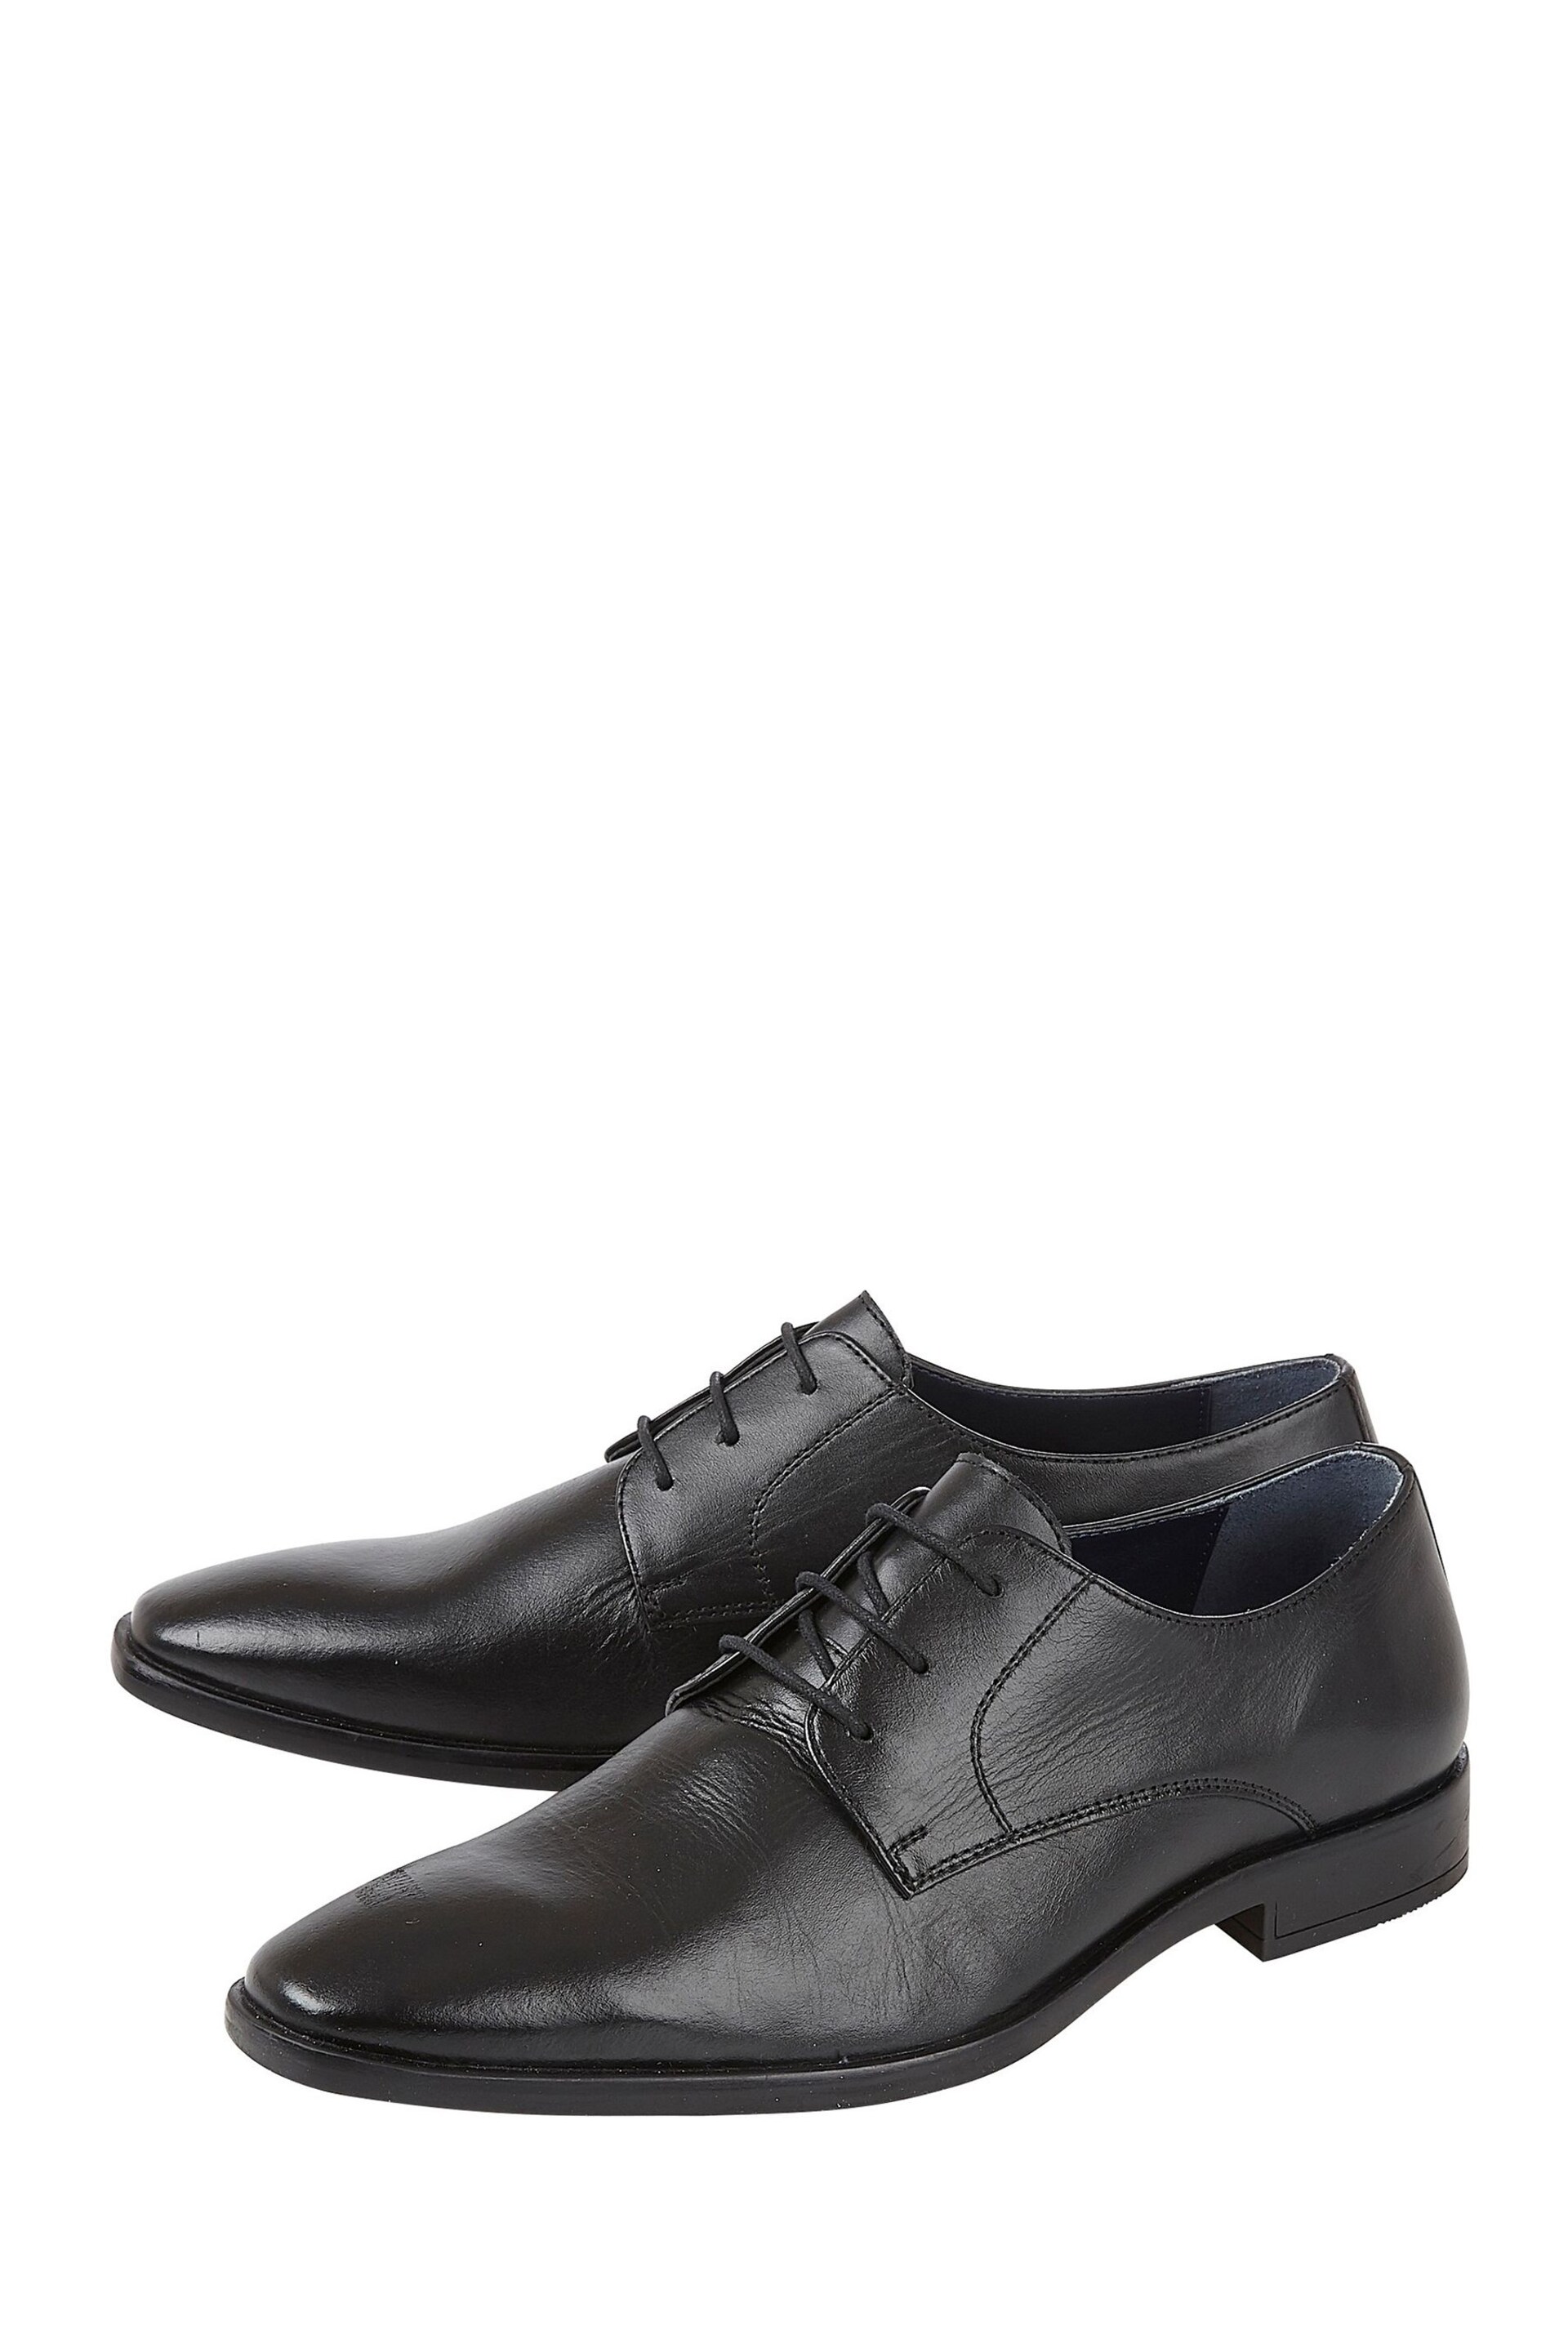 Lotus Charcole Black Leather Derby Shoes - Image 2 of 4